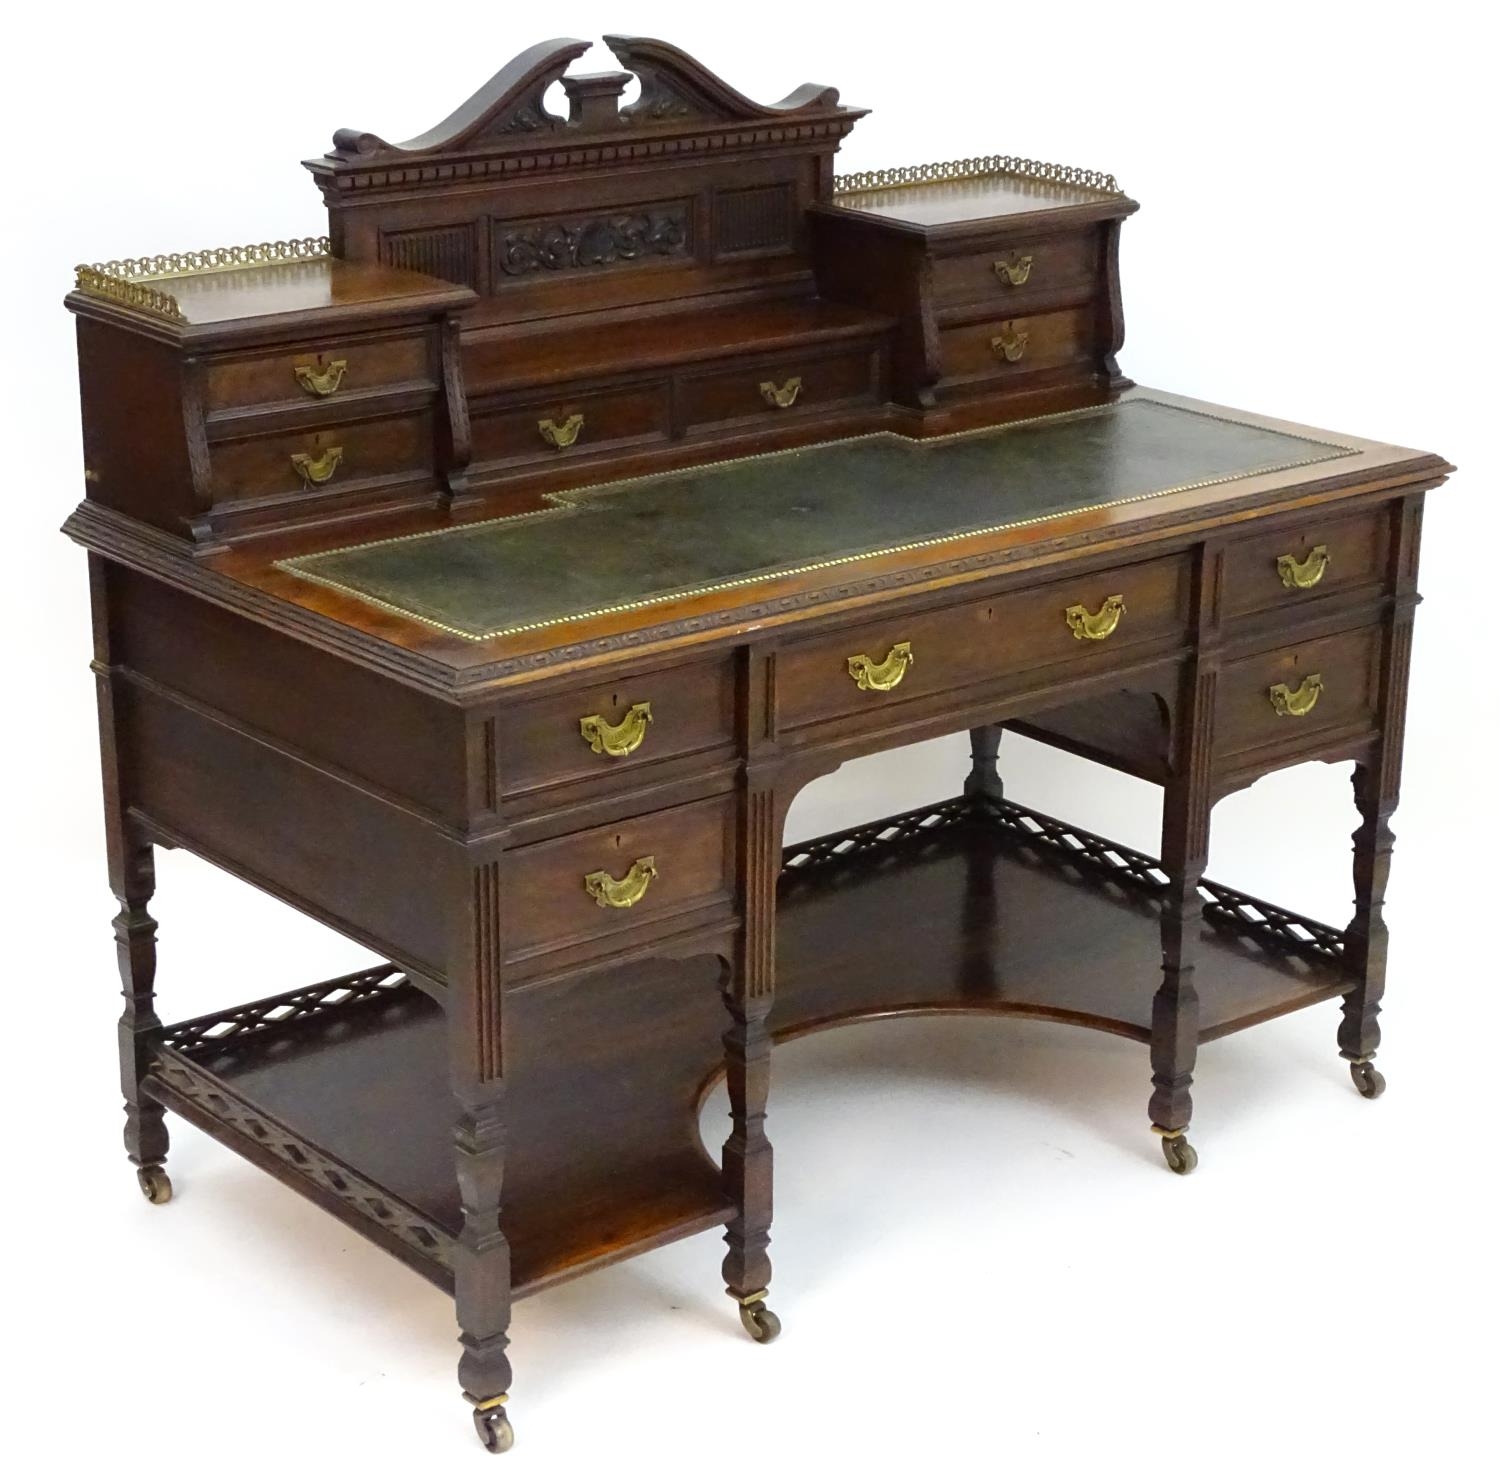 A late 19thC / early 20thC walnut Shoolbred desk with a carved back stand and a pierced brass